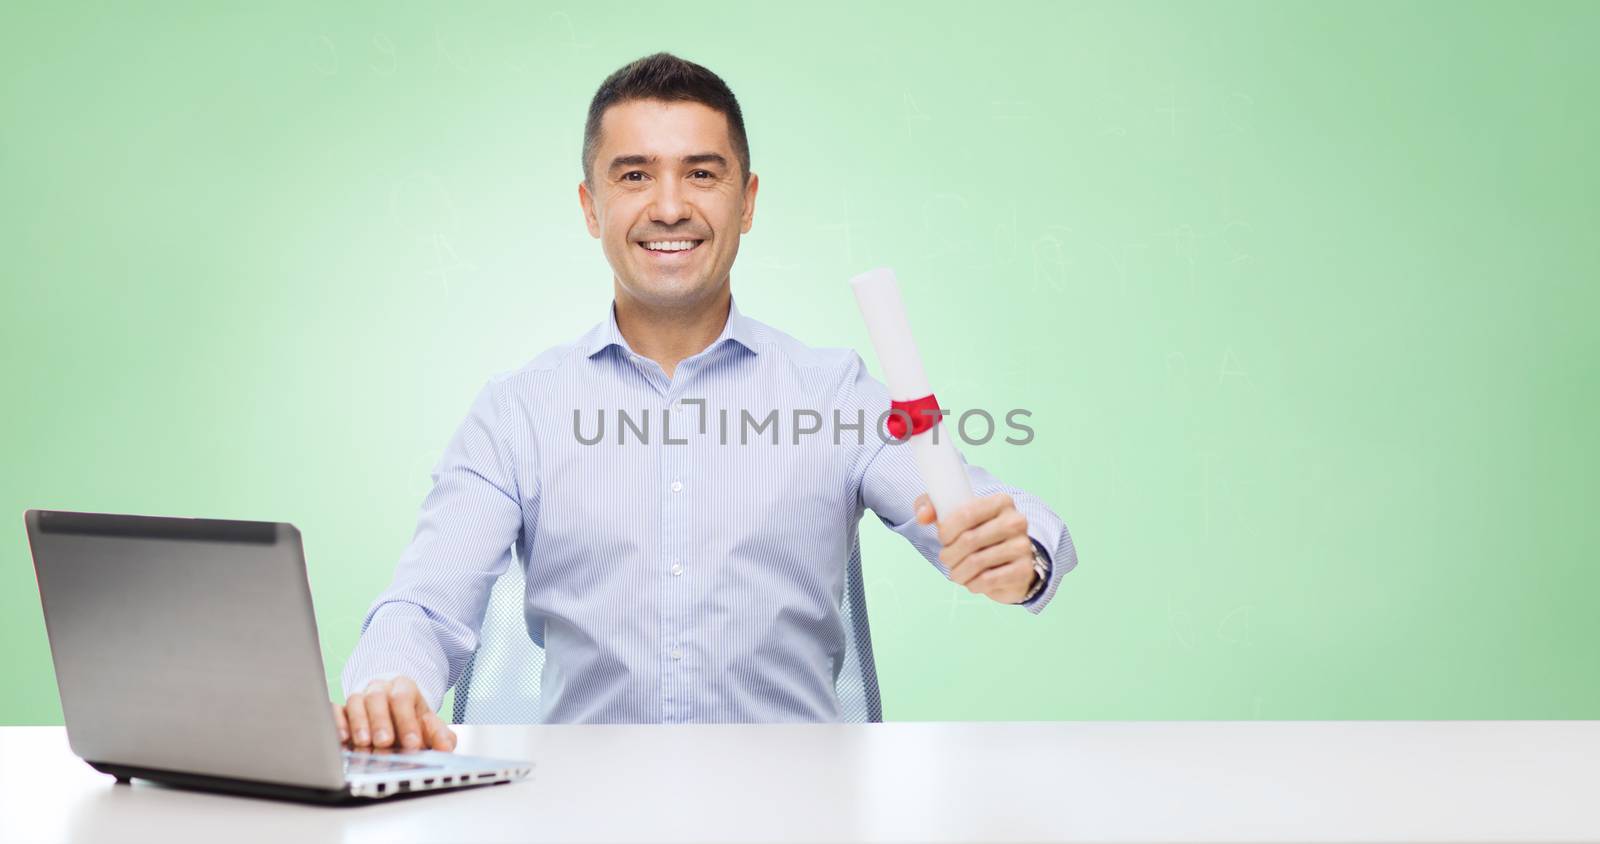 education, graduation, business, technology and people concept - smiling man with diploma and laptop computer sitting at table over green background